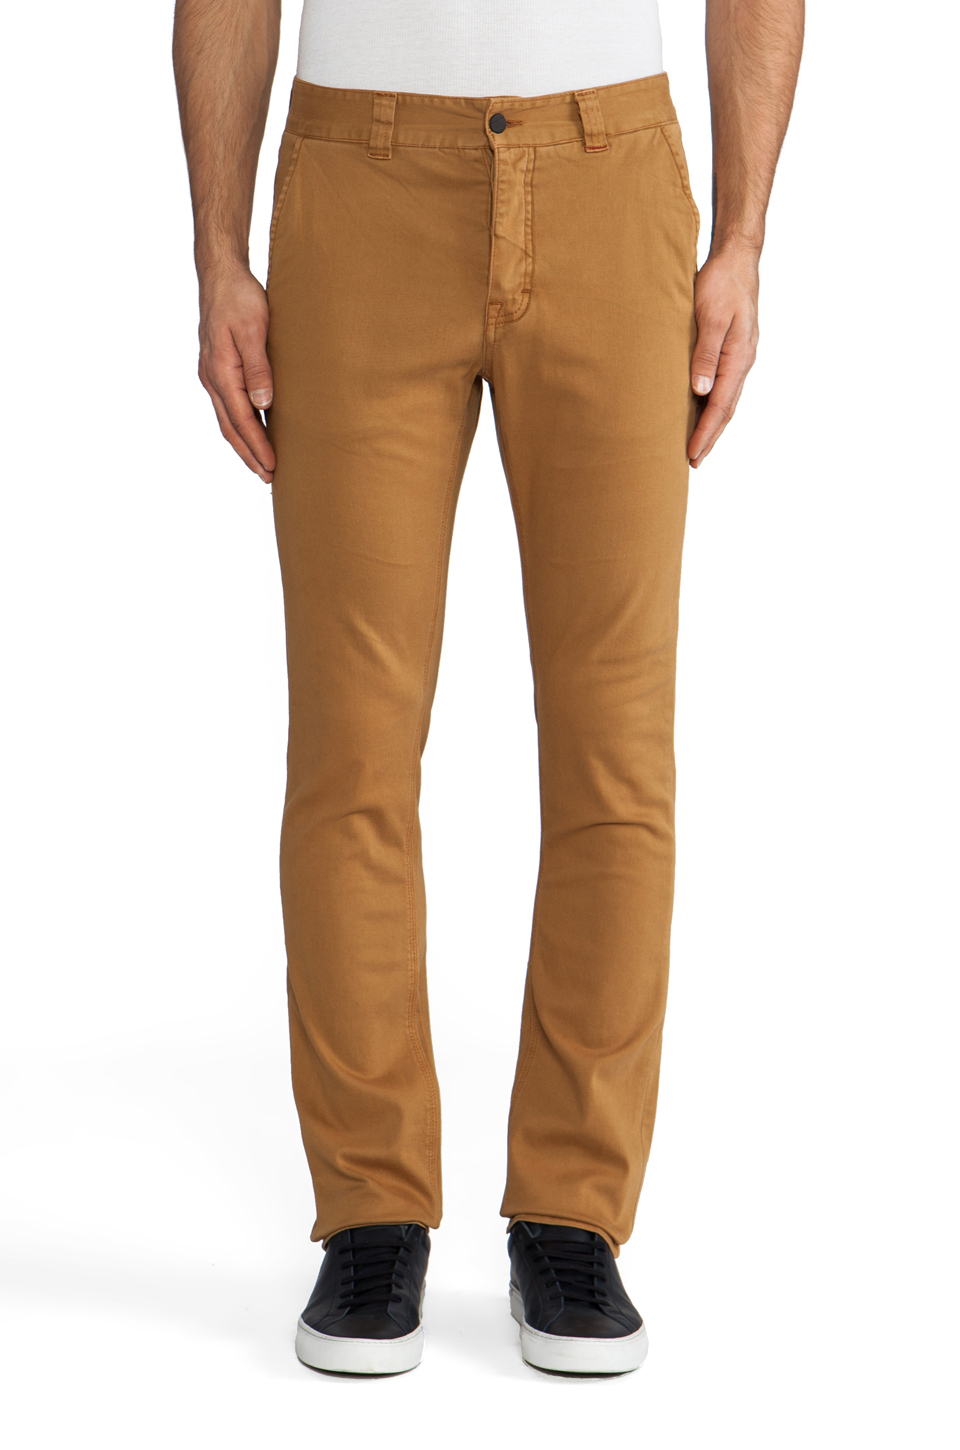 Lyst - Comune Raul Chino Pants in Tan in Brown for Men